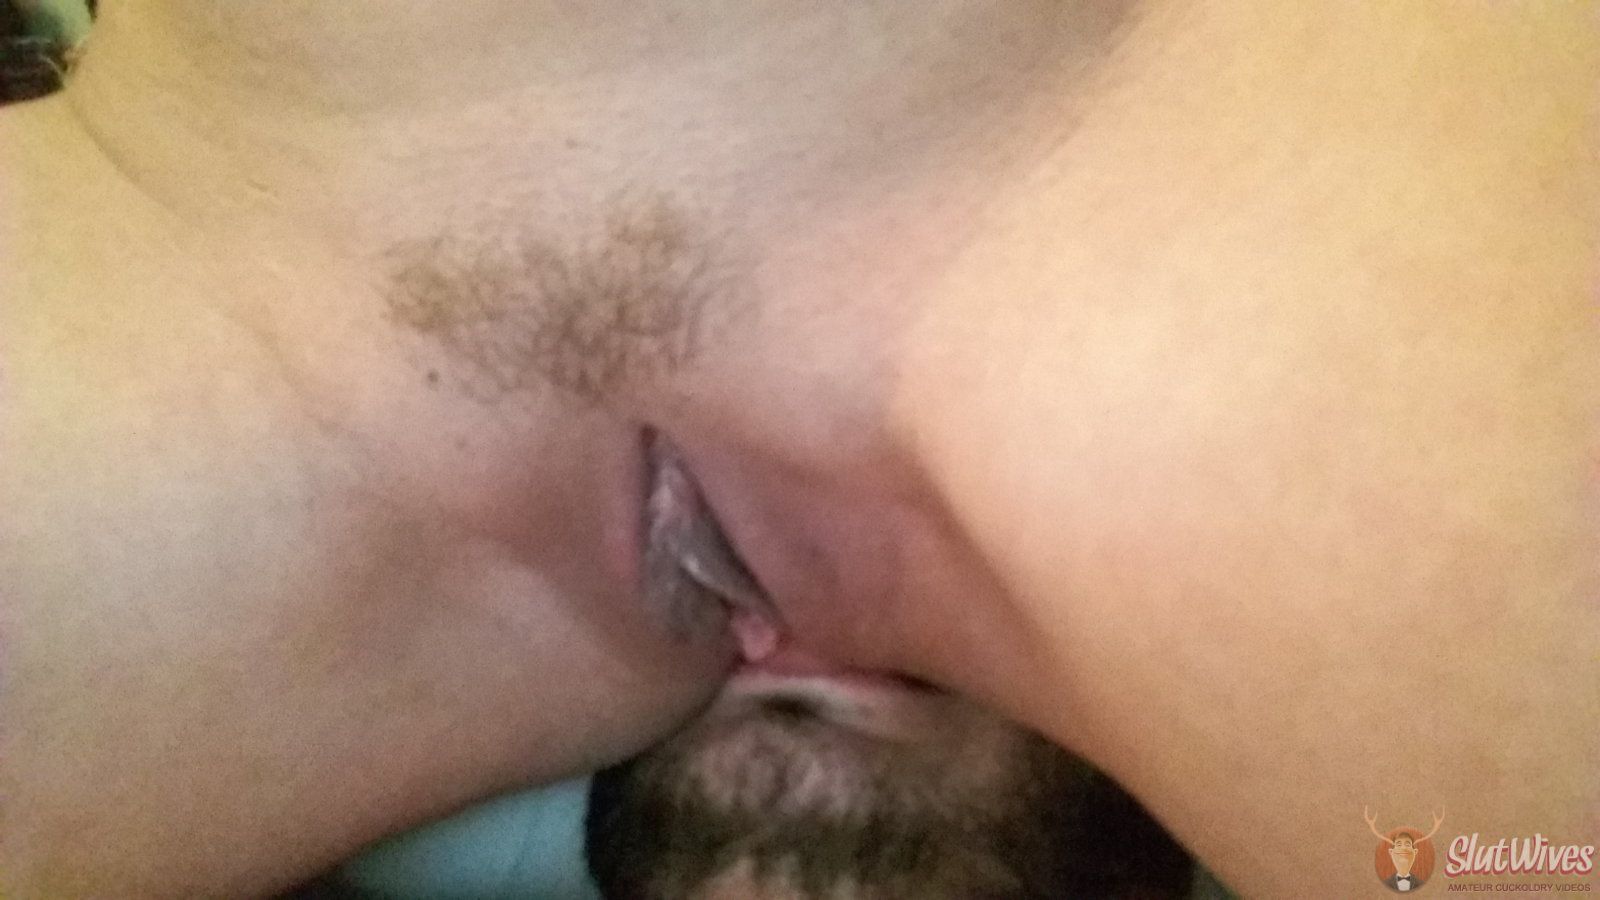 He suck all the cum right out of me